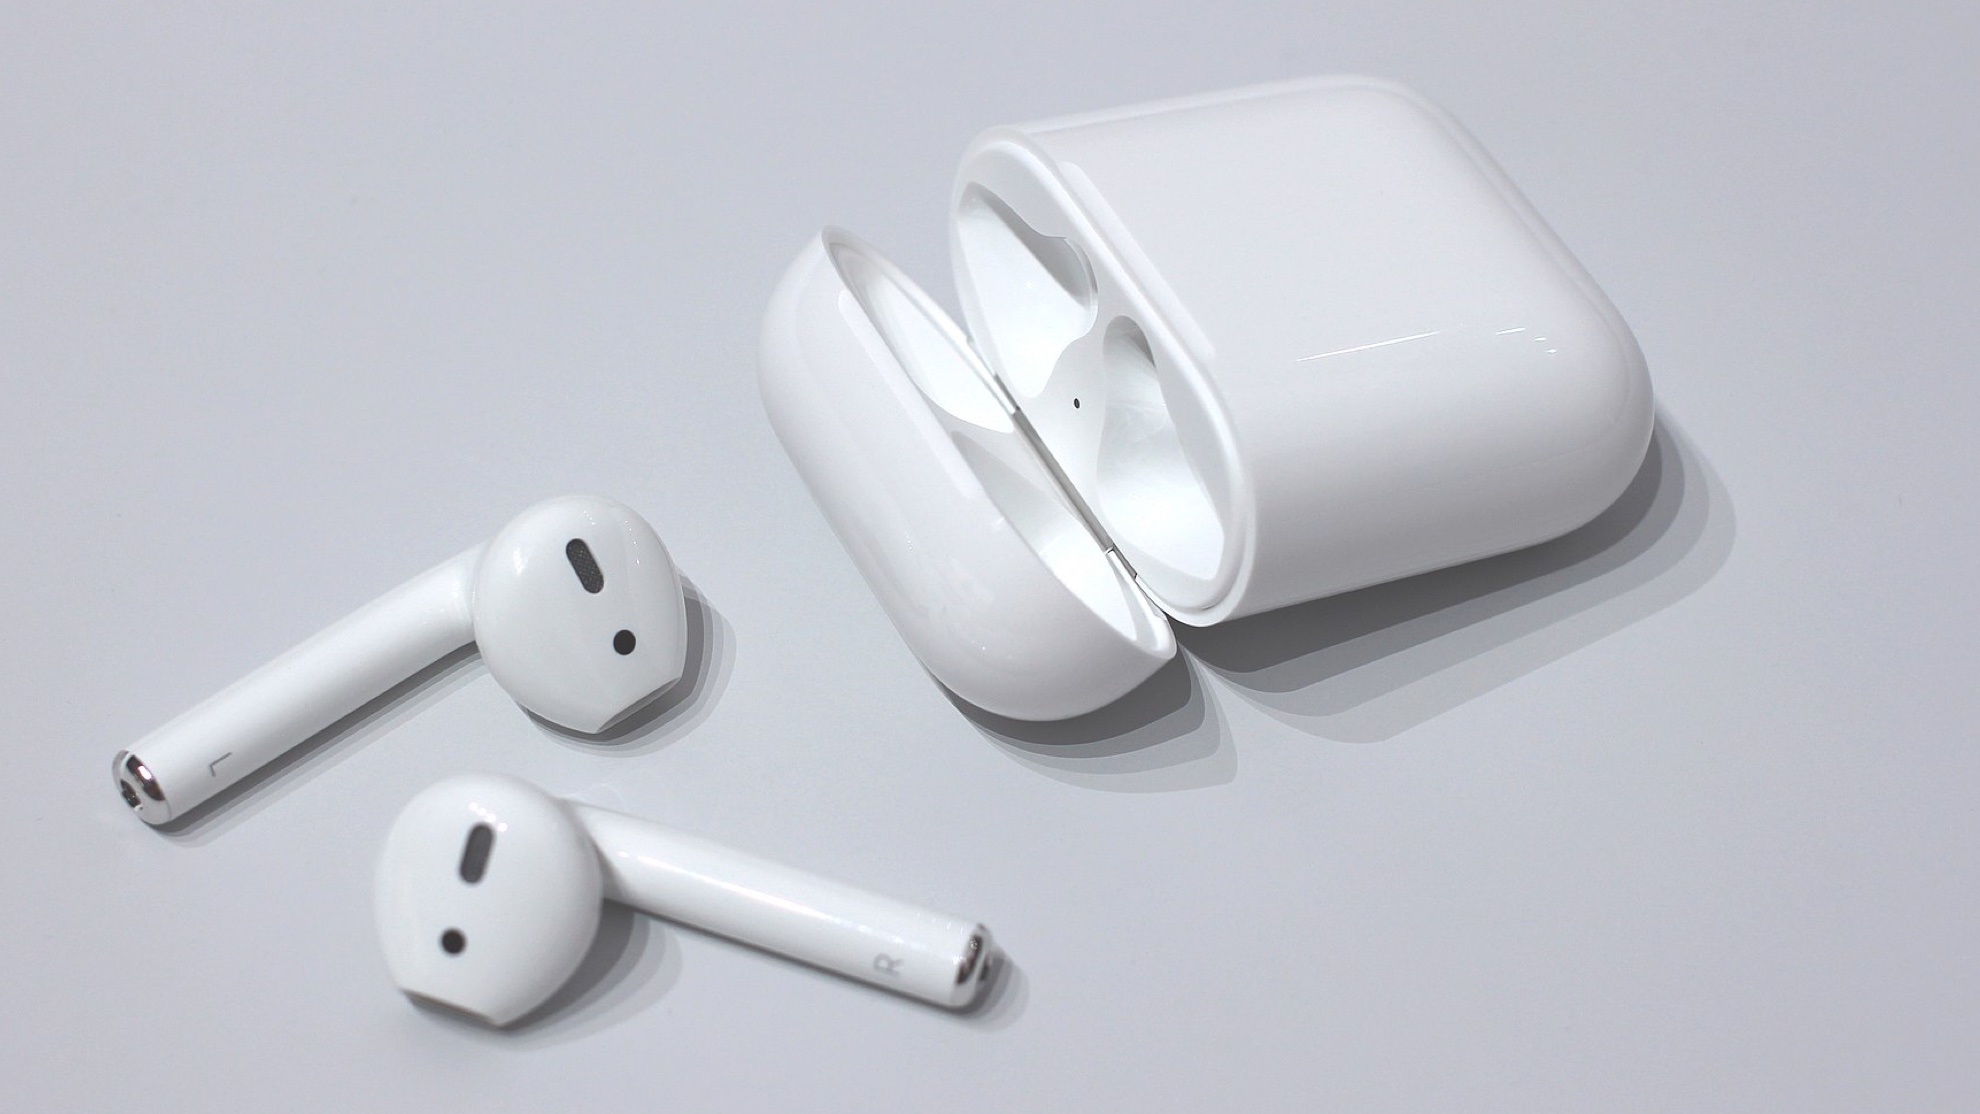 A pair of AirPods with a charging case